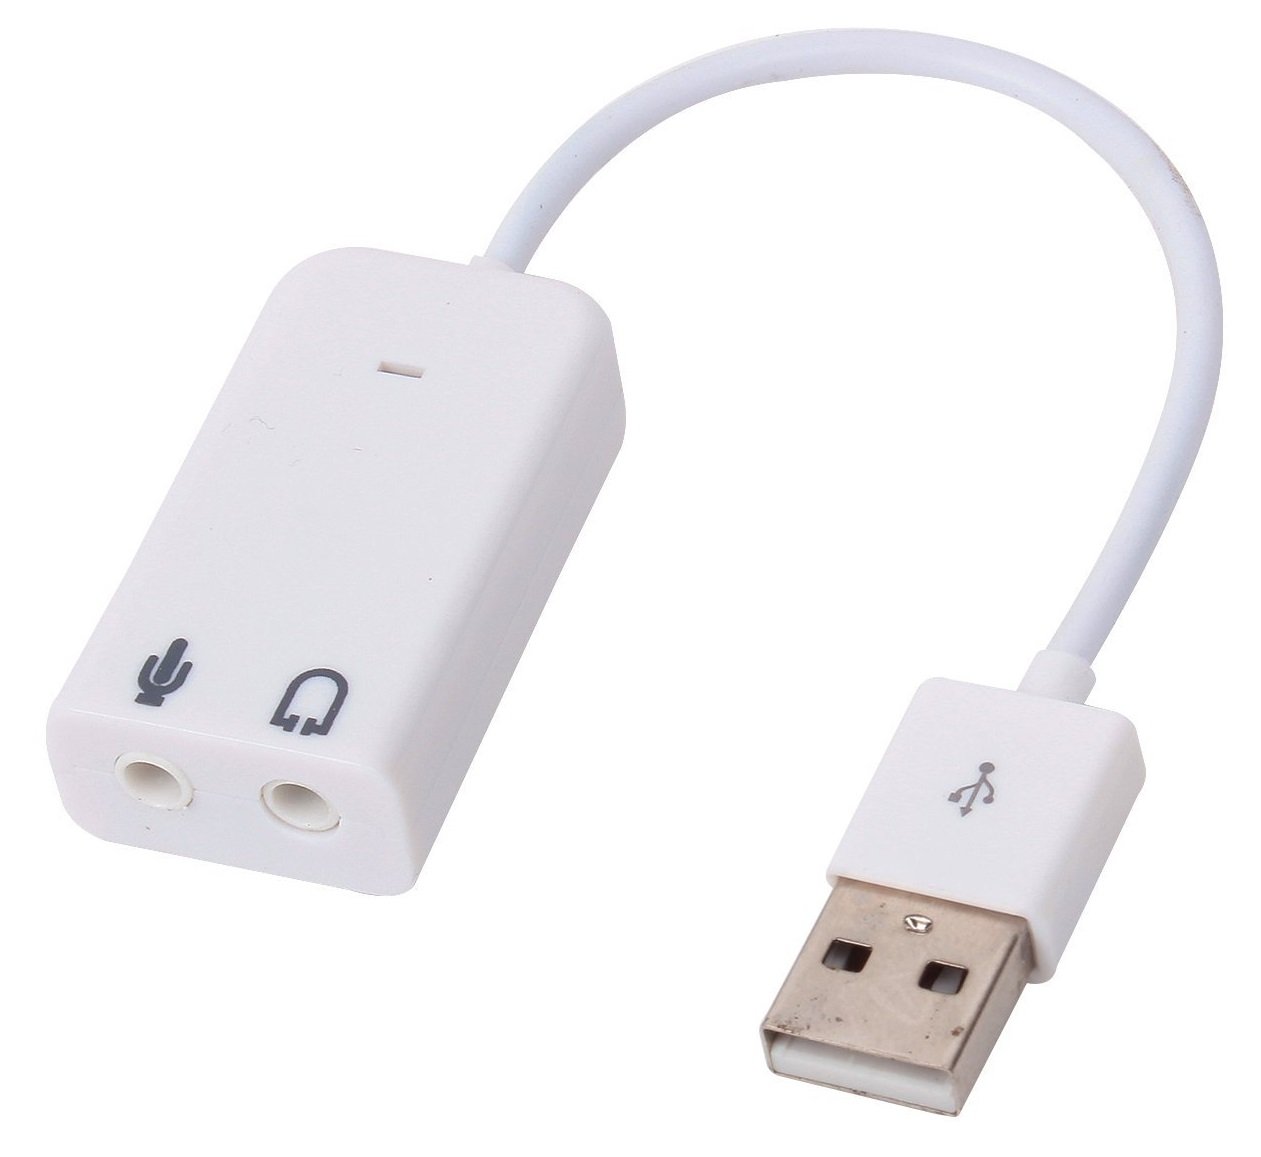 Cáp USB Sound Adapter 7.1 Chanel (work with Raspberry Pi) – Hshop.vn